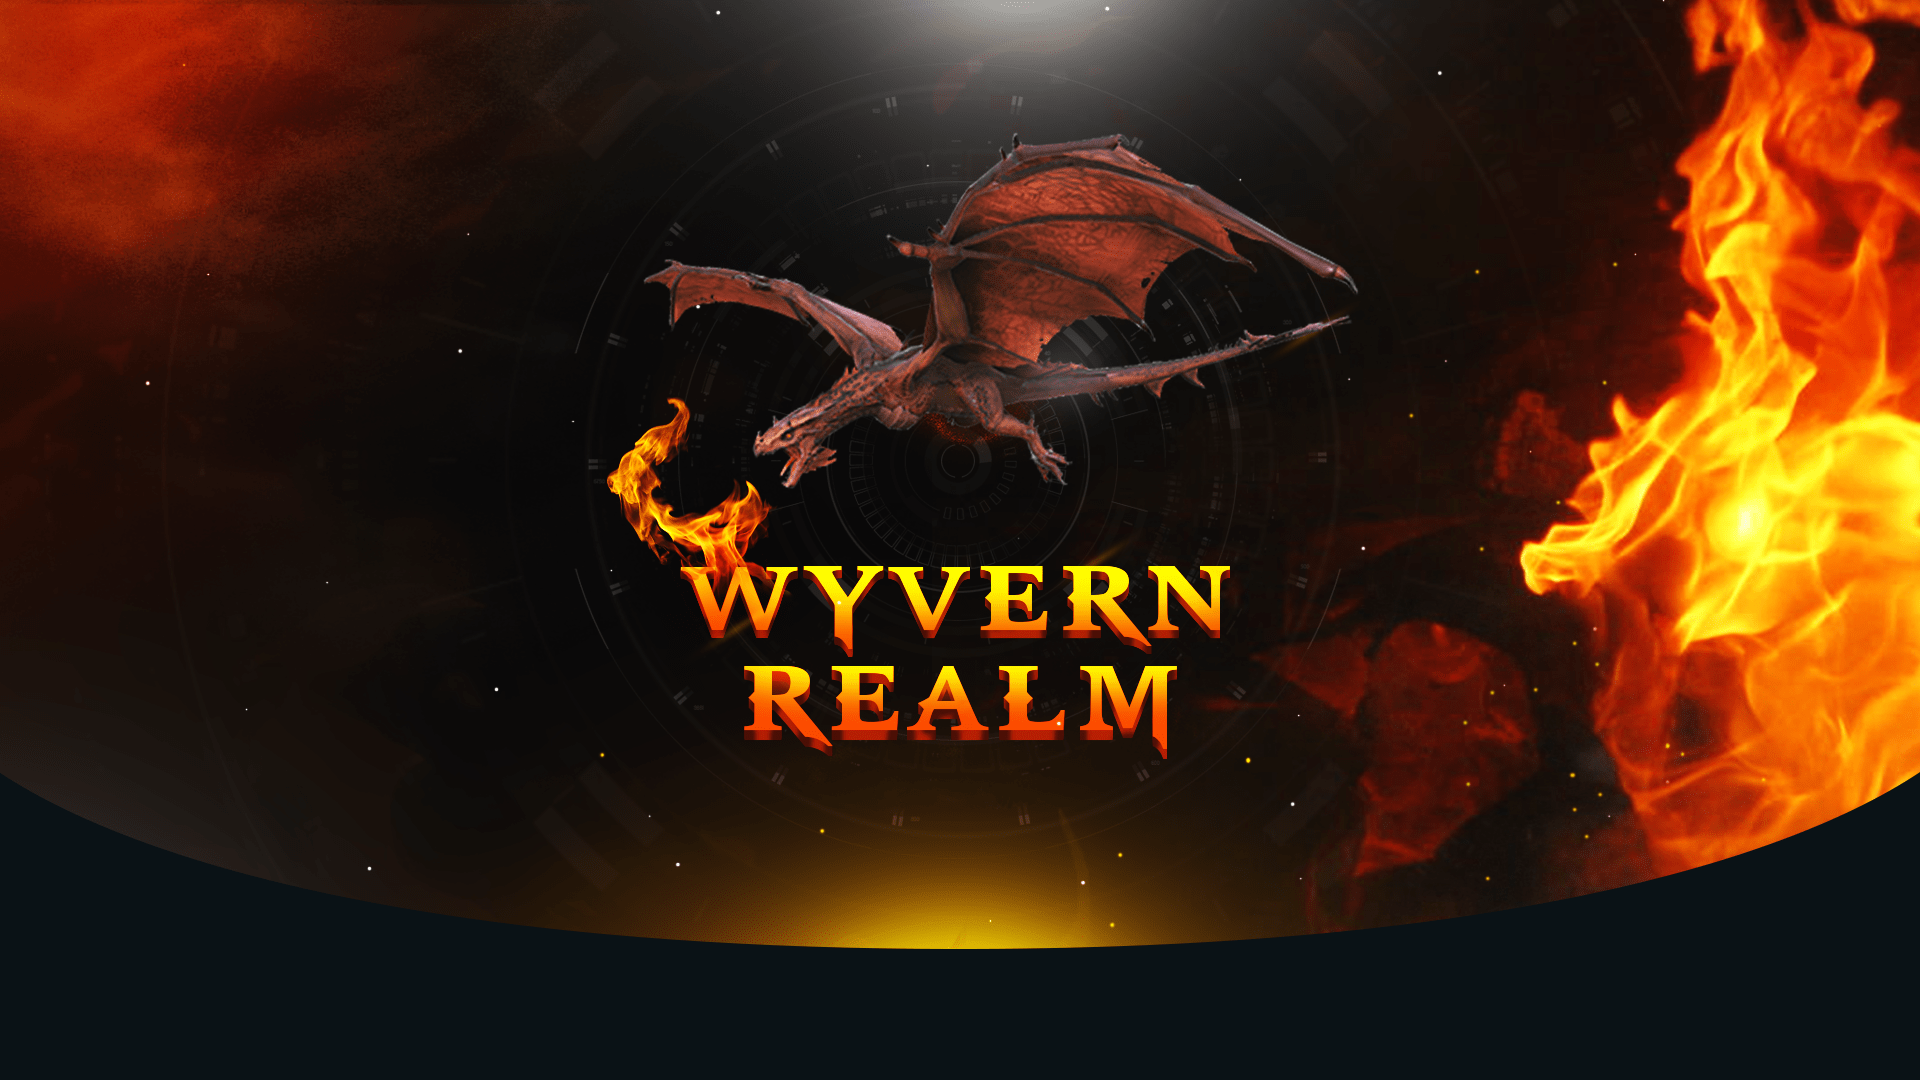 Banner Image of Wyvern shooting fire with text saying Wyvern Realm